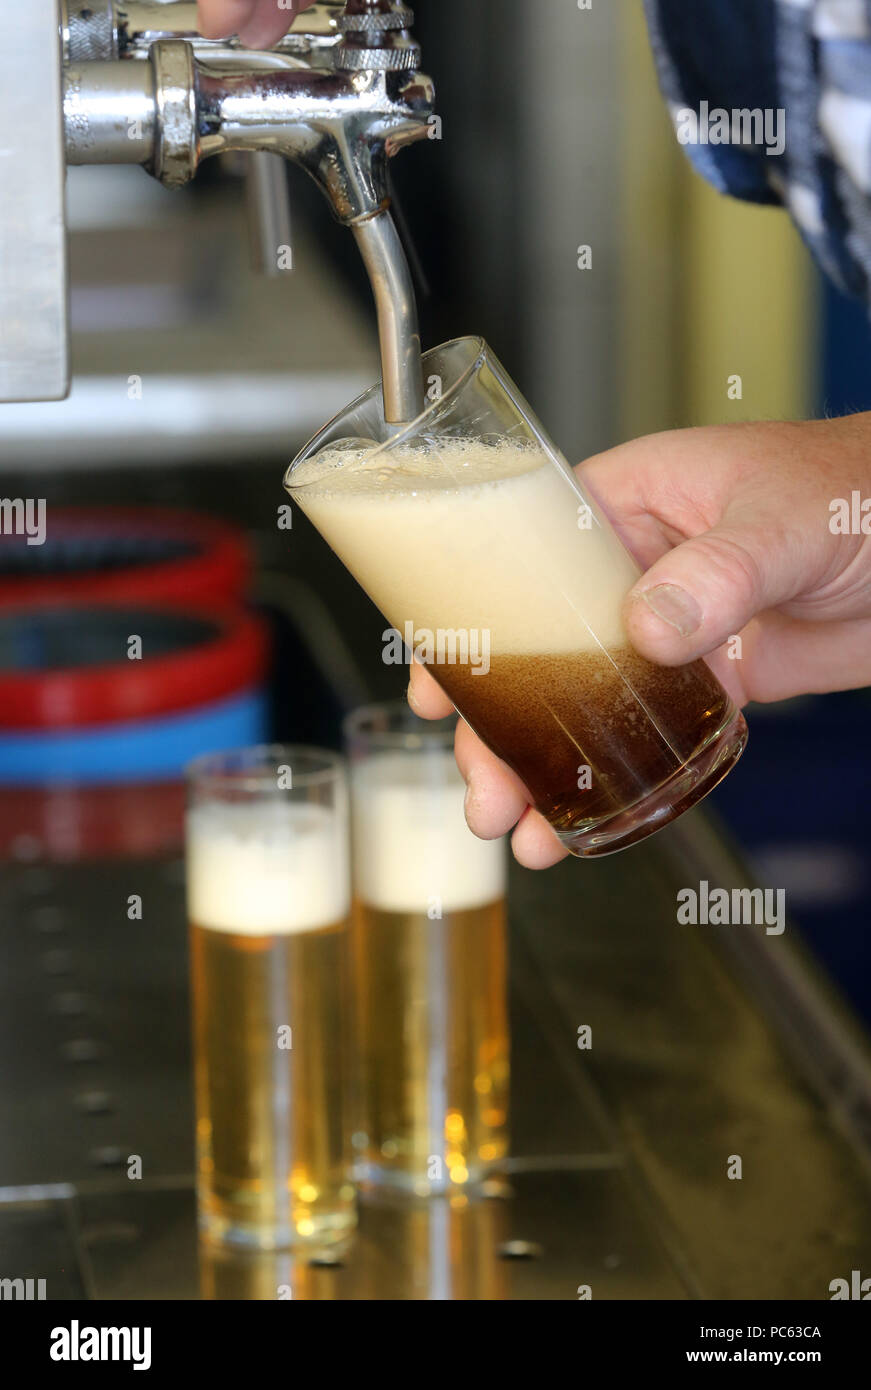 ILLUSTRATION - A glass of Altbier 'old beer', a dark top-fermented beer  traditionally brewed around the city of Düsseldorf, is poured from a tap in  a pub in Moers, Germany, 21 February.